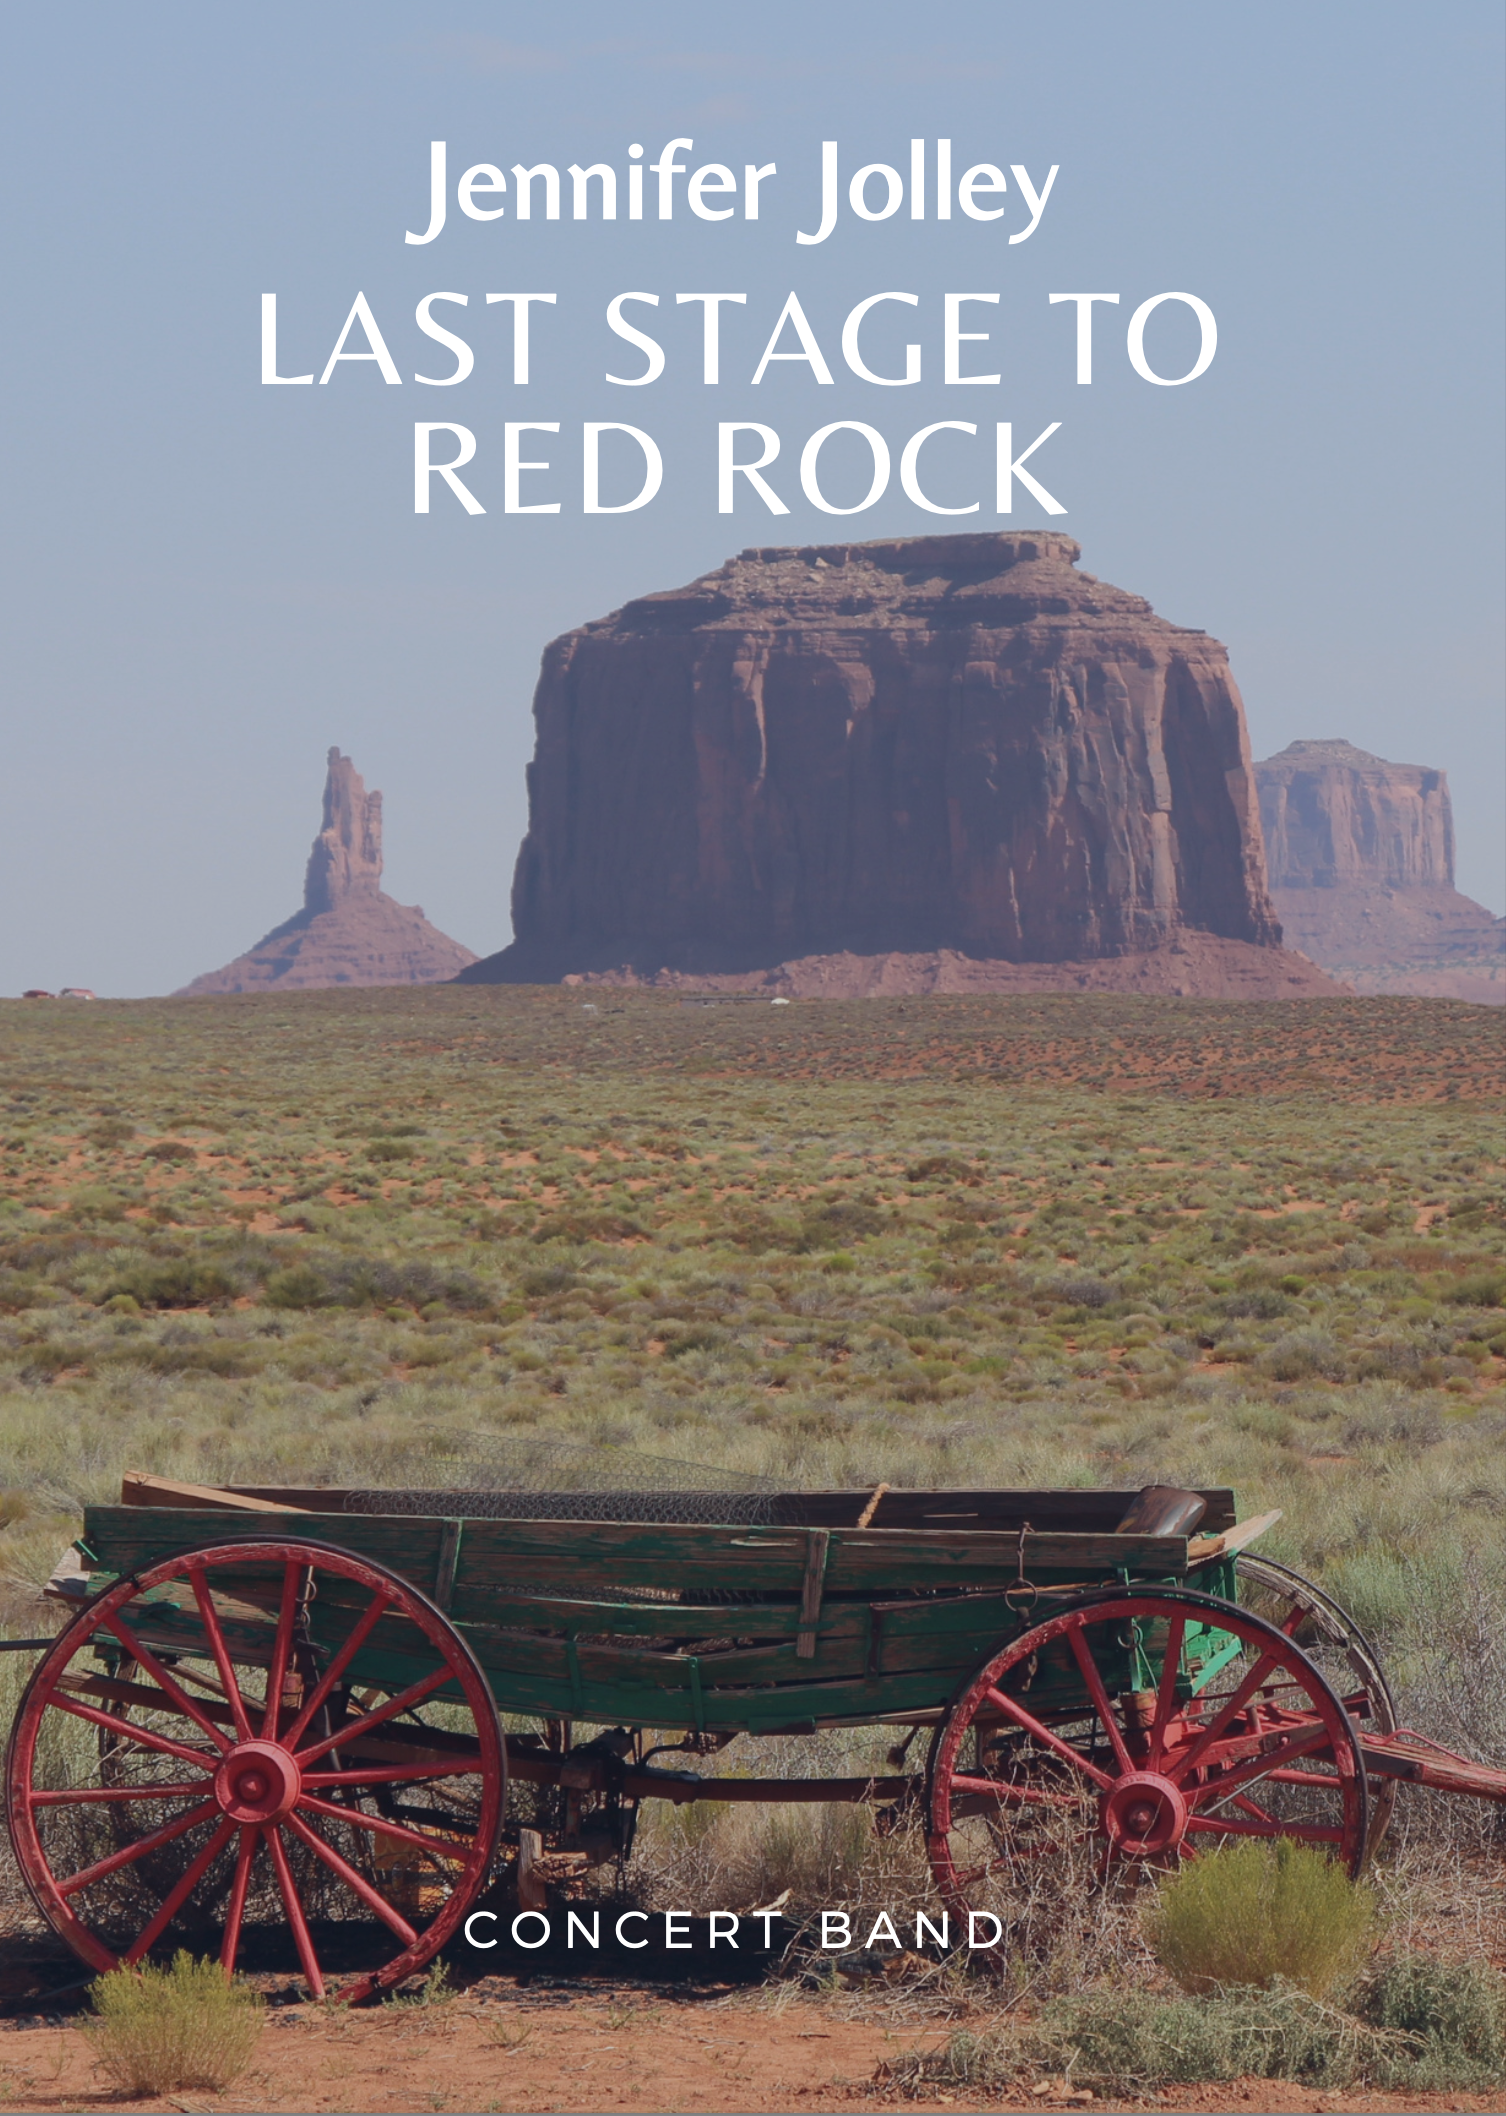 Last Stage To Red Rock by Jennifer Jolley